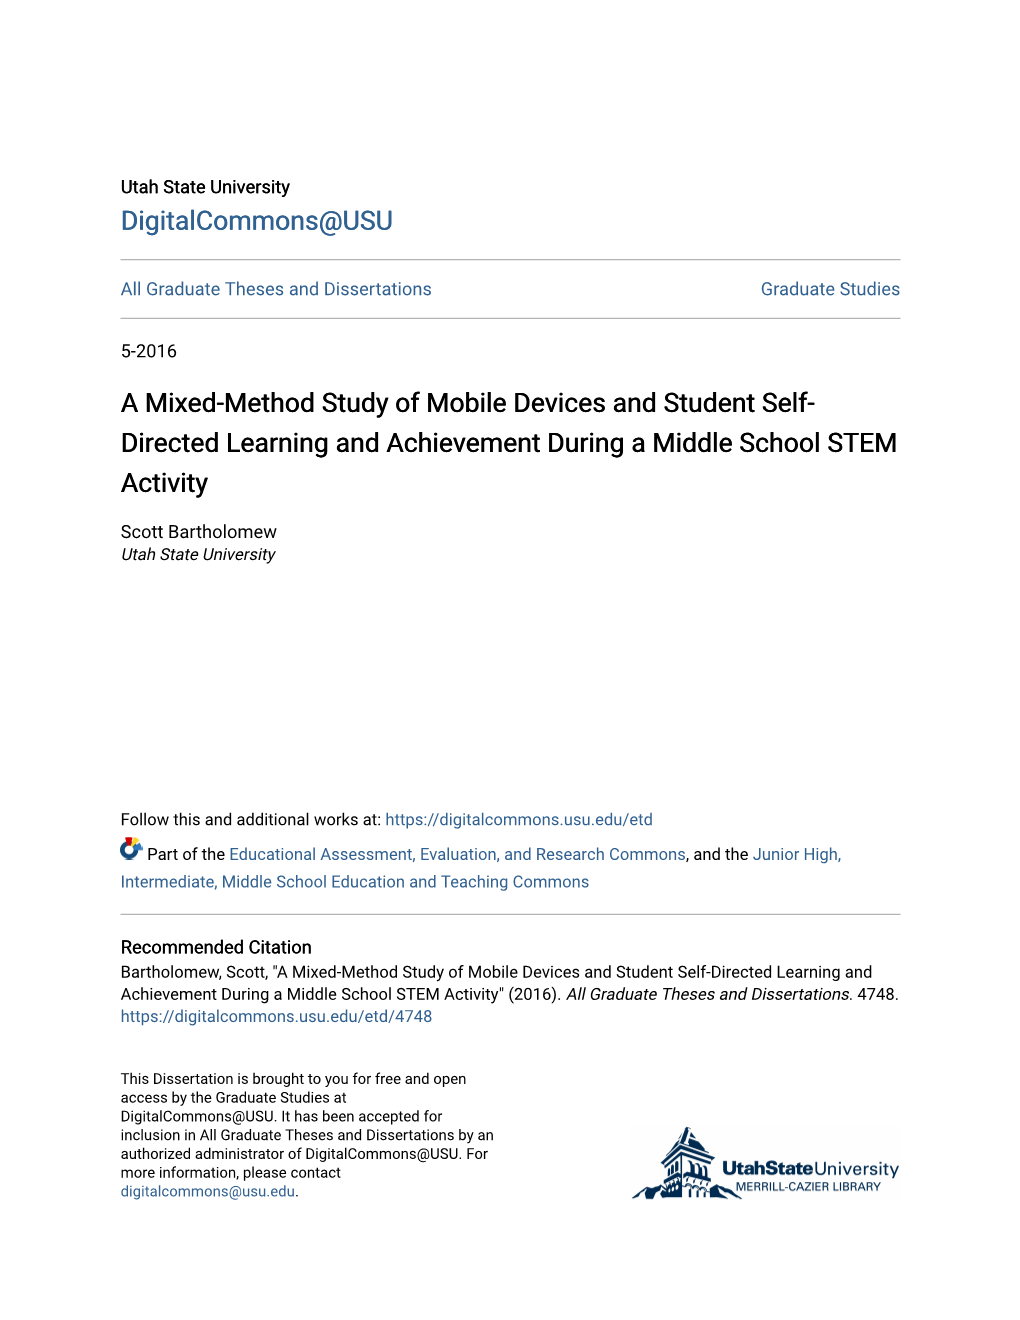 A Mixed-Method Study of Mobile Devices and Student Self-Directed Learning and Achievement During a Middle School STEM Activity" (2016)